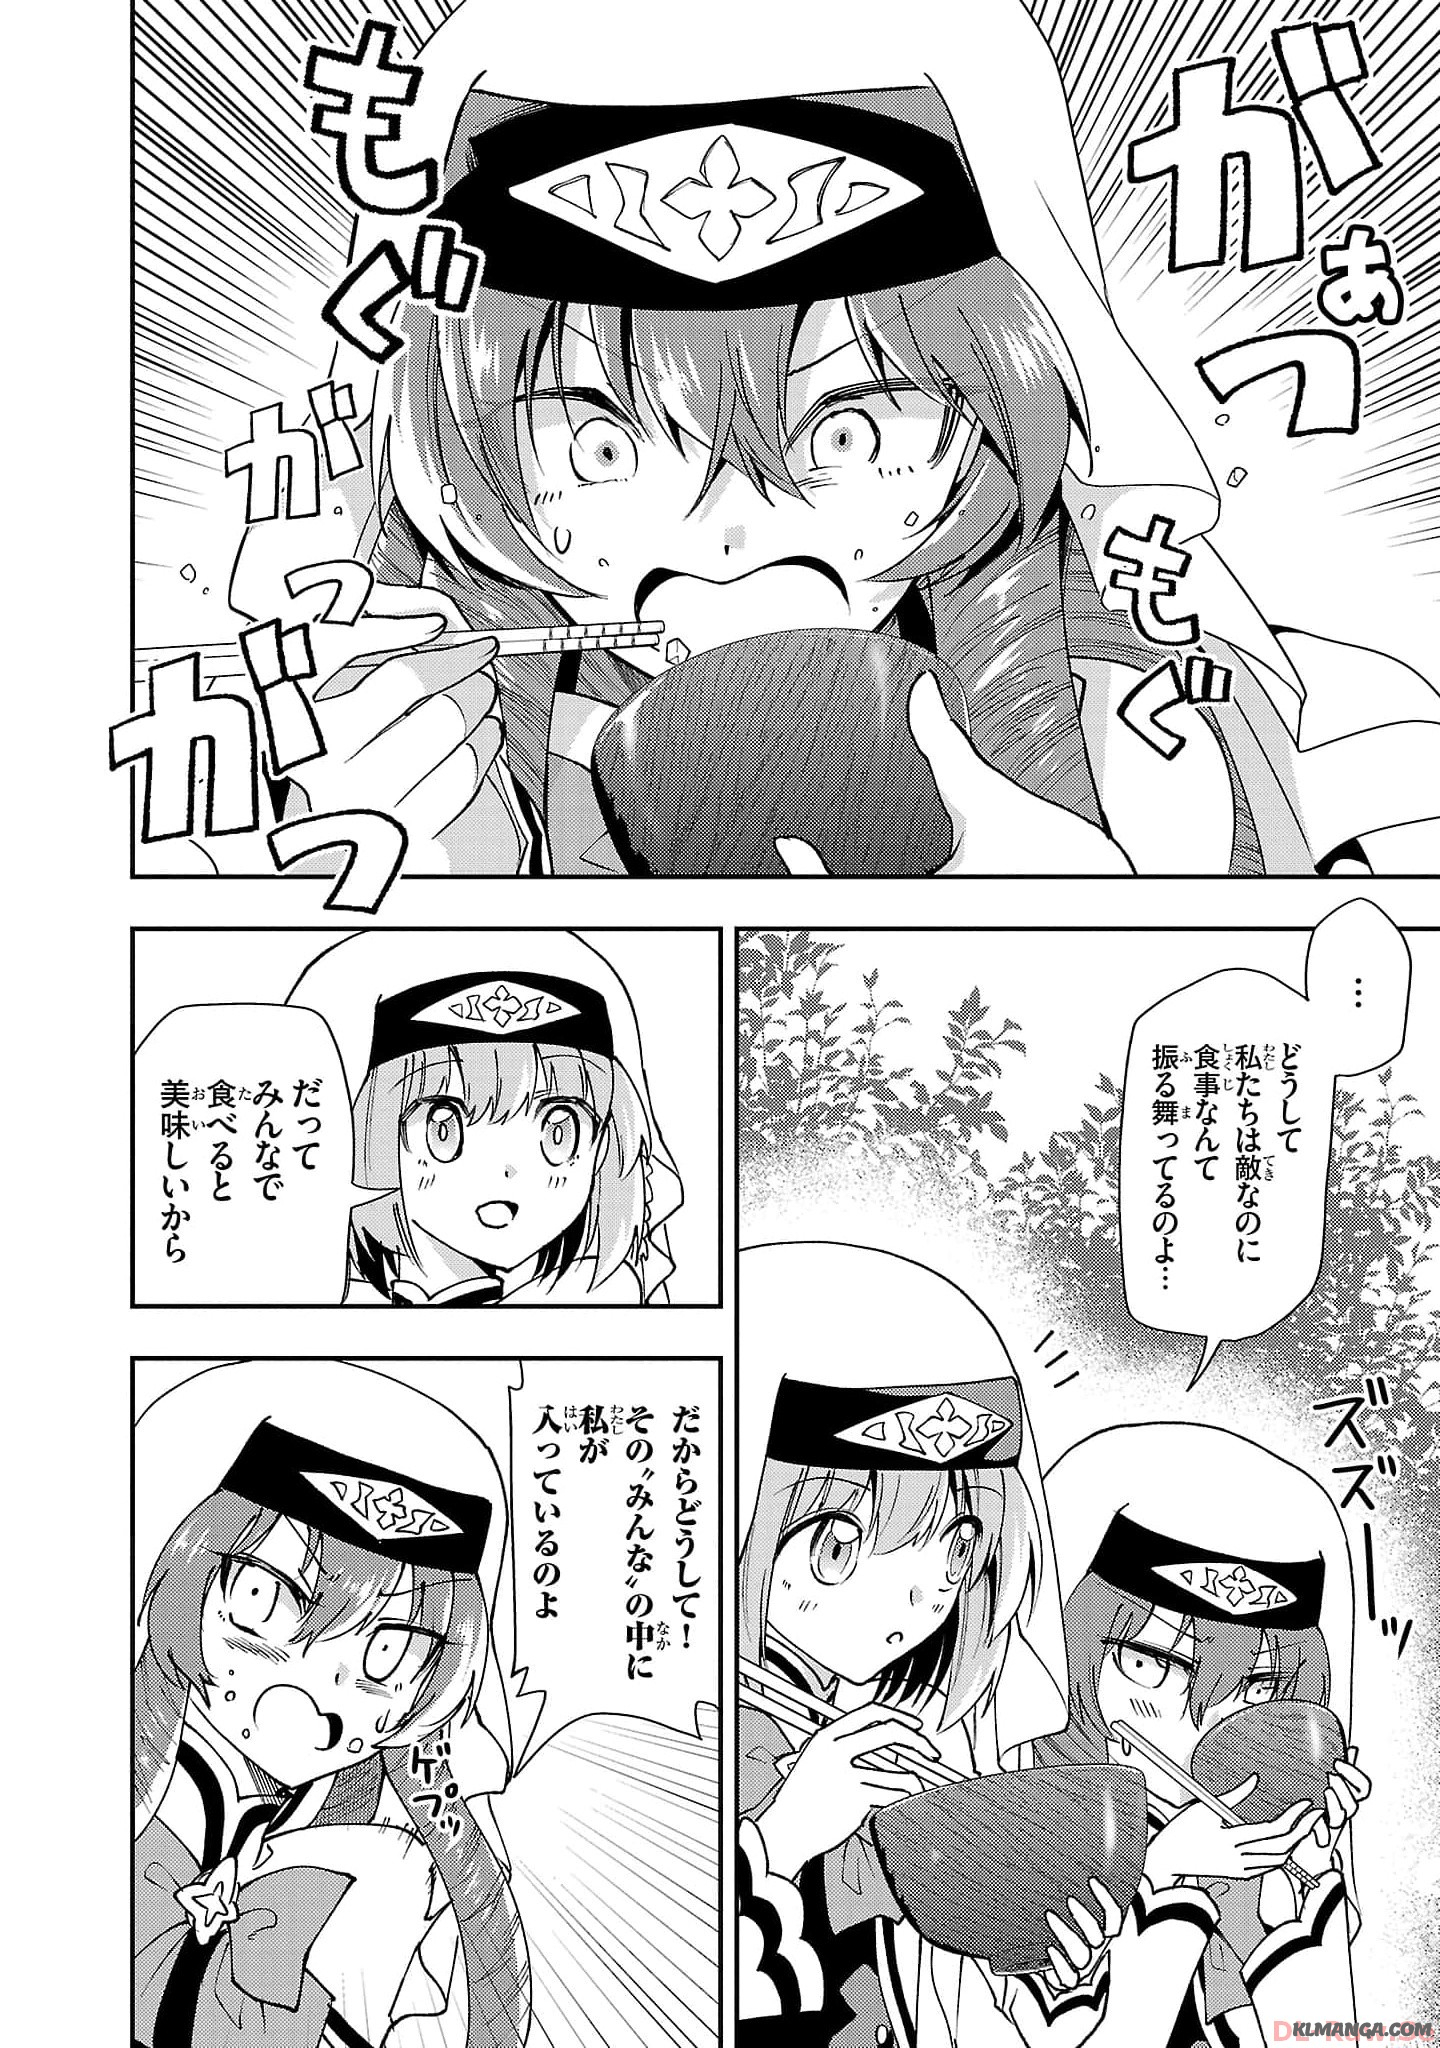 Hungry Saint and Full-Stomach Witch's Slow Life in Another World! 腹ペコ聖女とまんぷく魔女の異世界スローライフ! 第22話 - Page 18